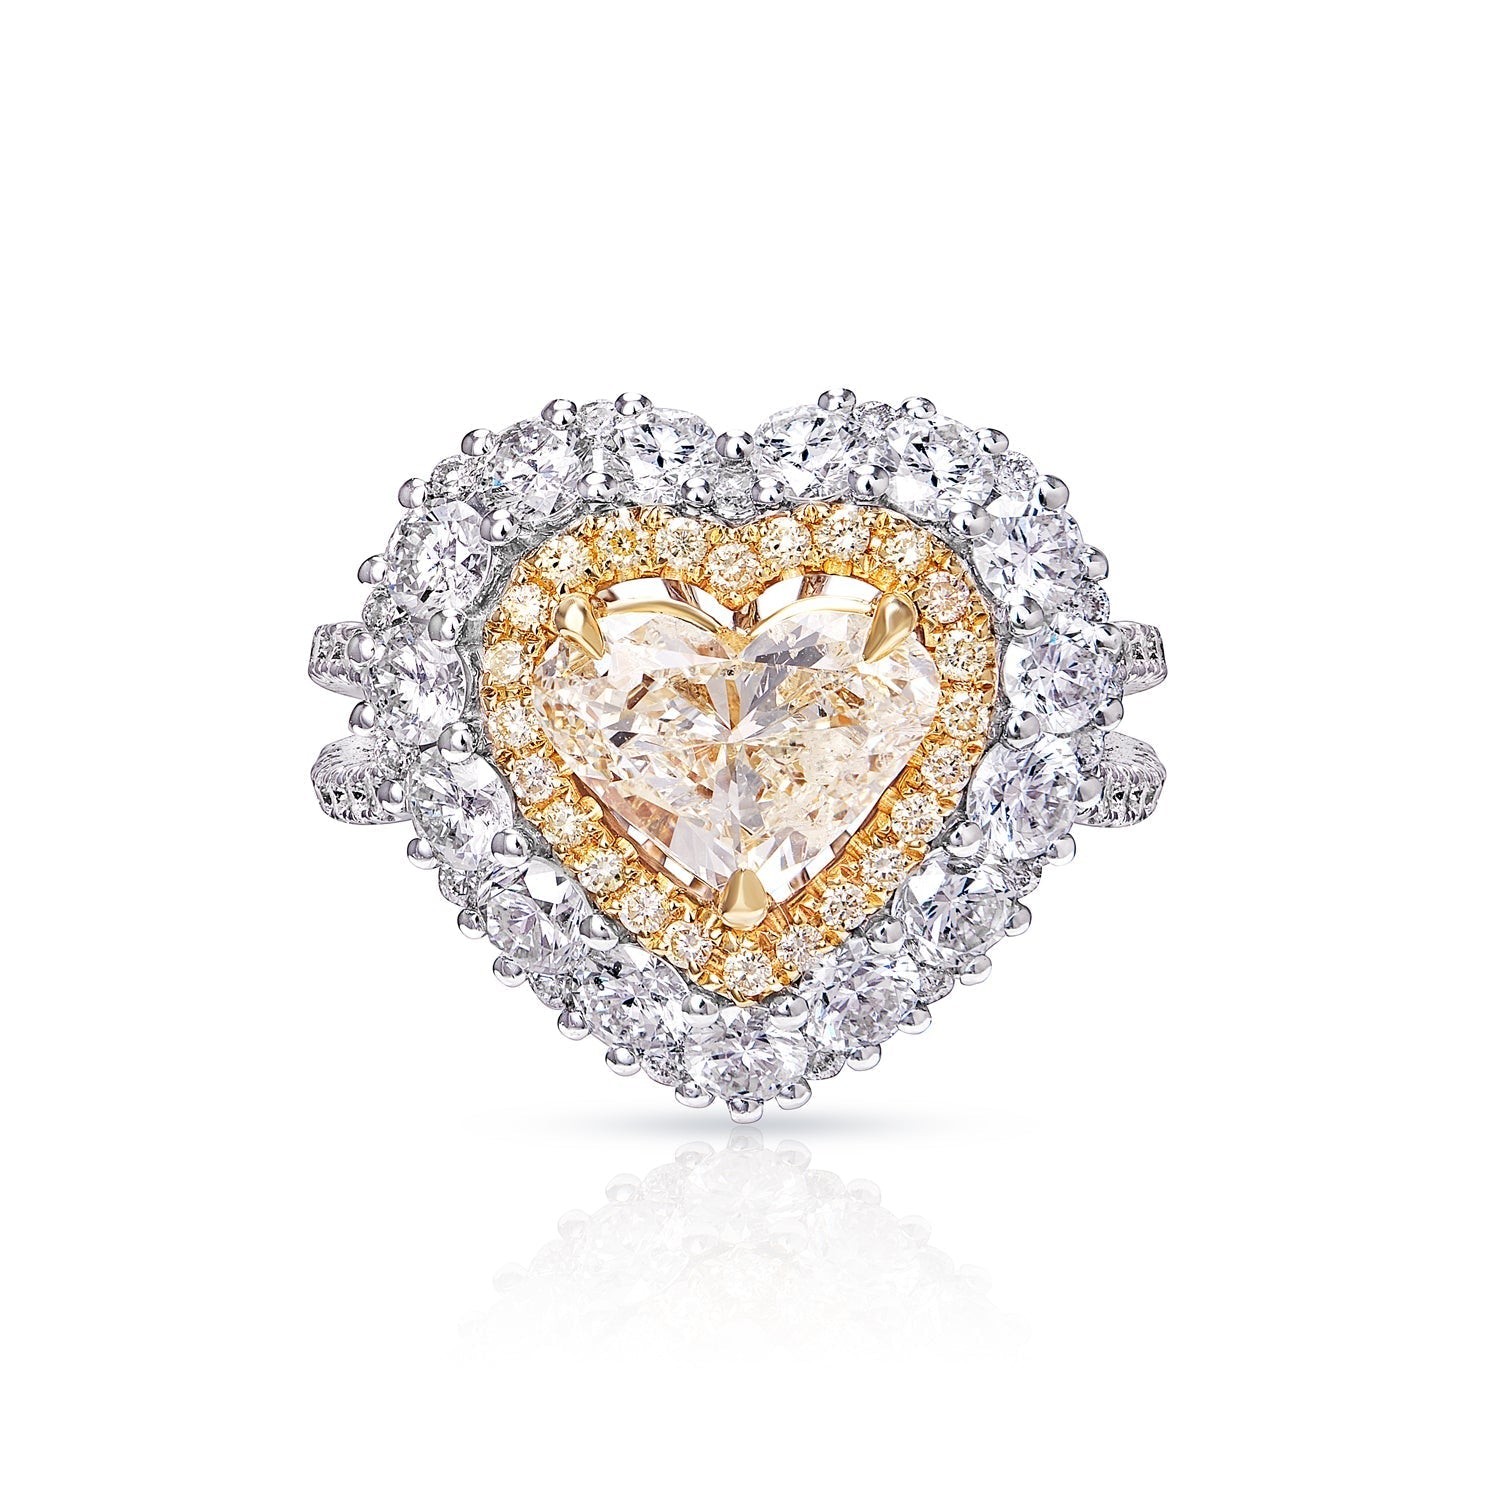 Bailey 3 Carat Heart Shape Earth Mined Diamond Engagement Ring Halo in 18k White Gold Front View